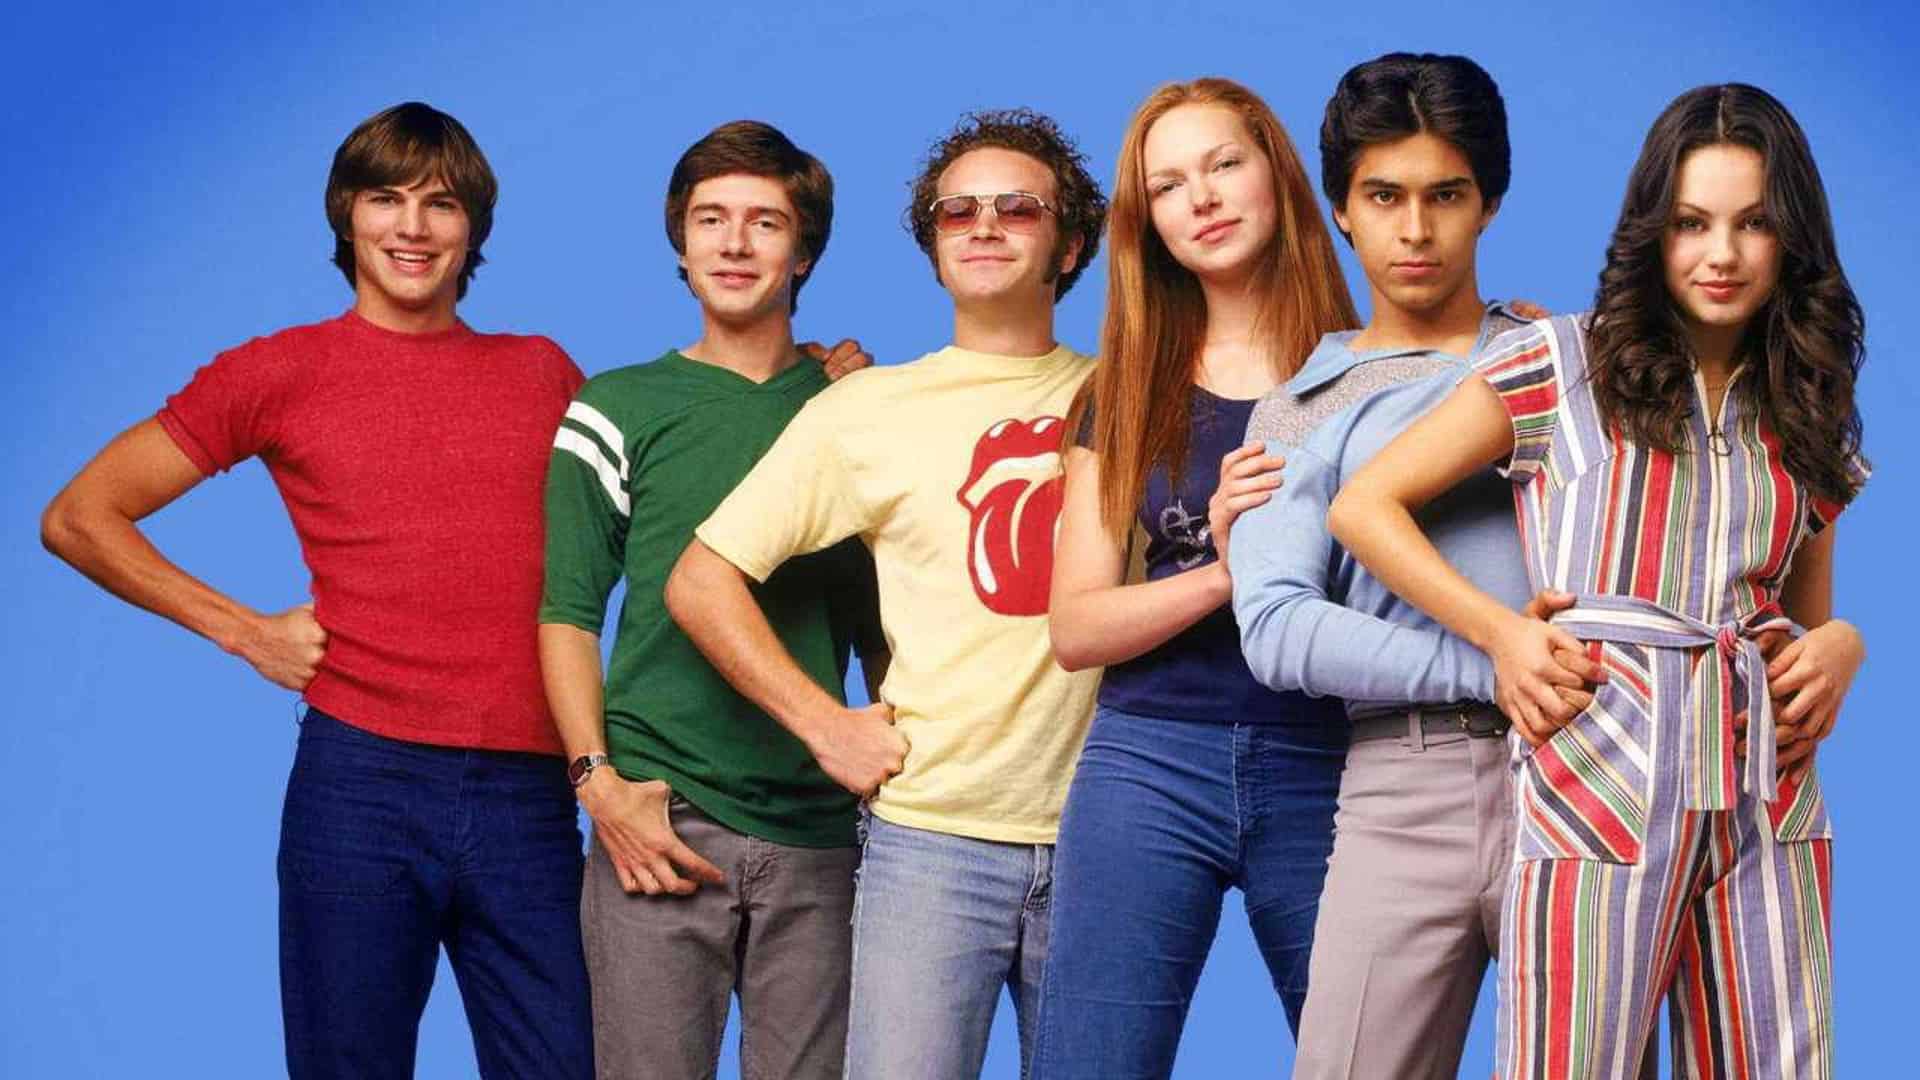 Top 10 Shows like Friends You can Watch